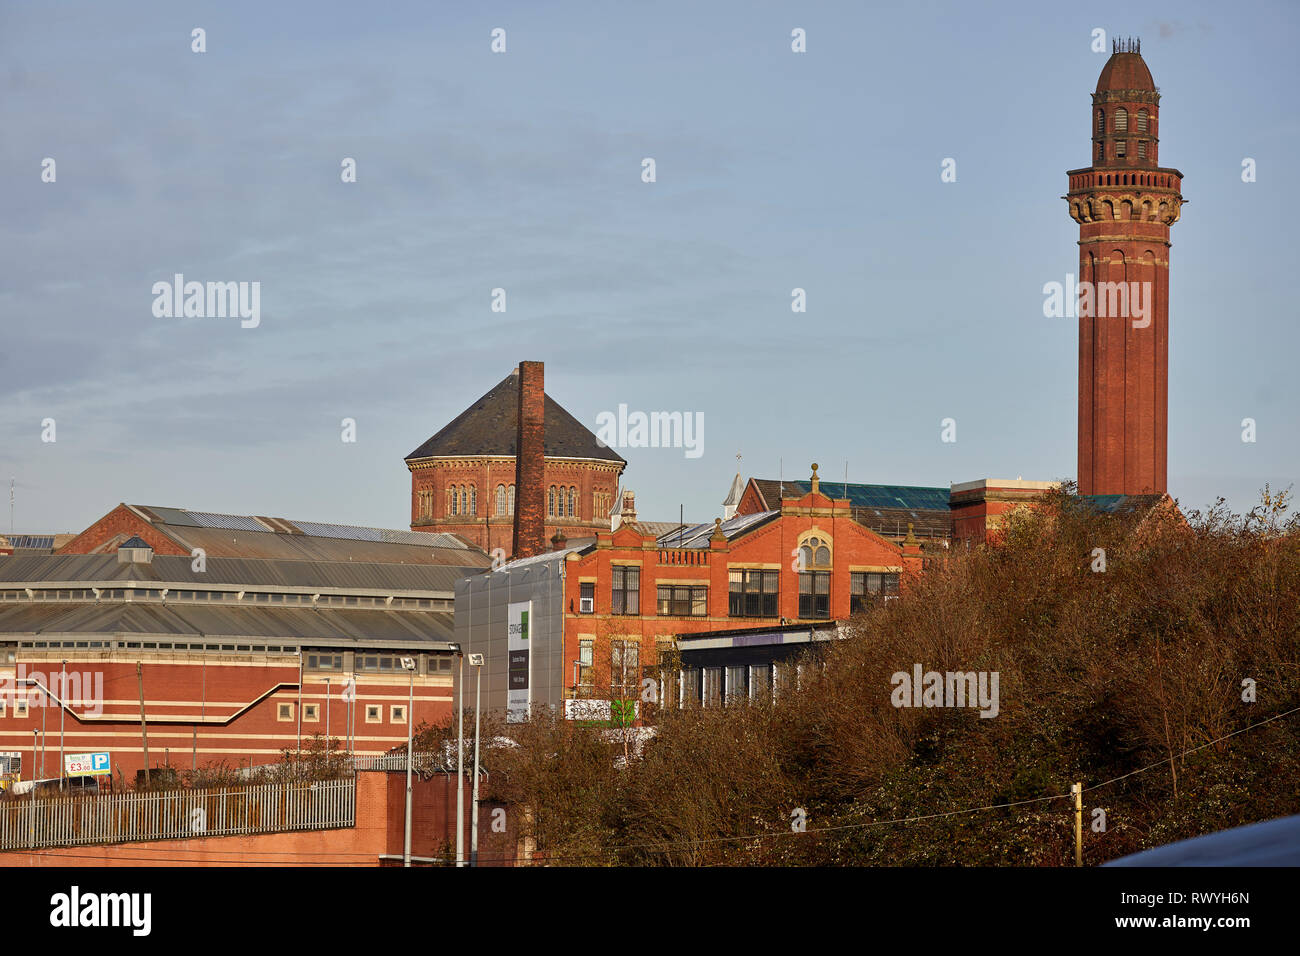 Grade II listed HMP Her majesty's Prison high-security men's prison referred to as Strangeways designed by Alfred Waterhouse, Stock Photo